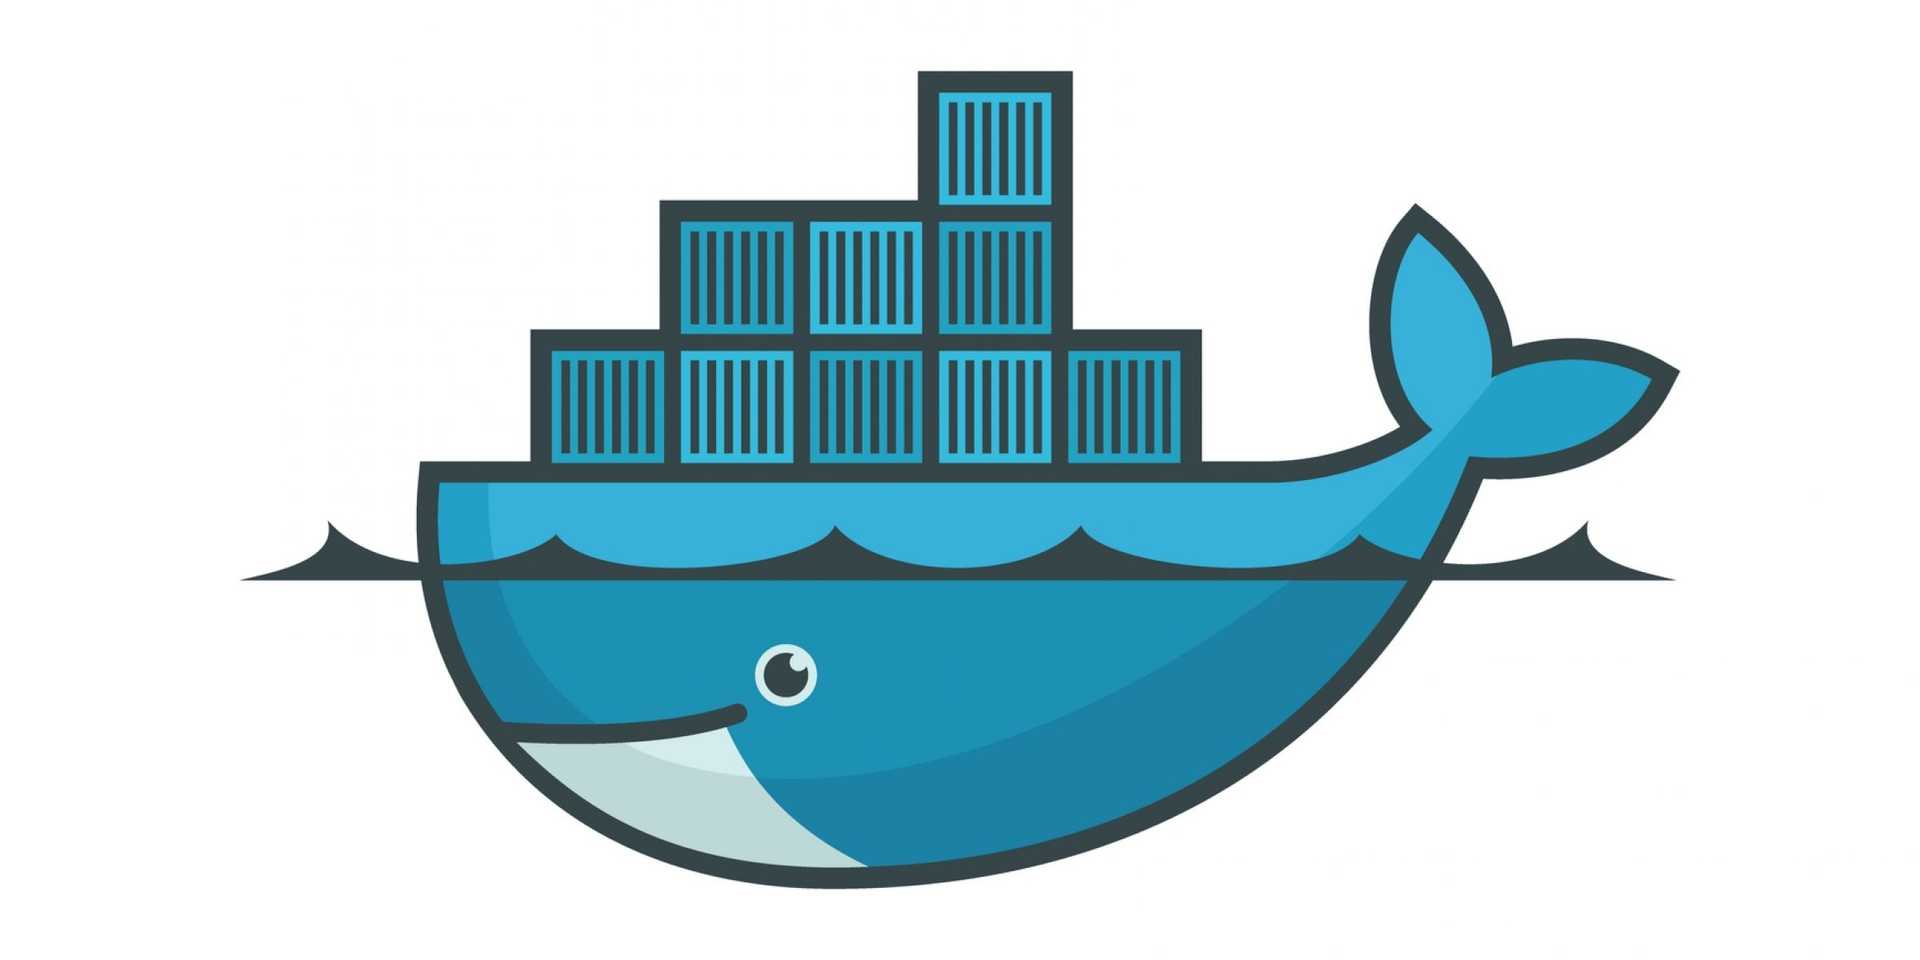 A Beginner's Guide to Docker Containers and Images